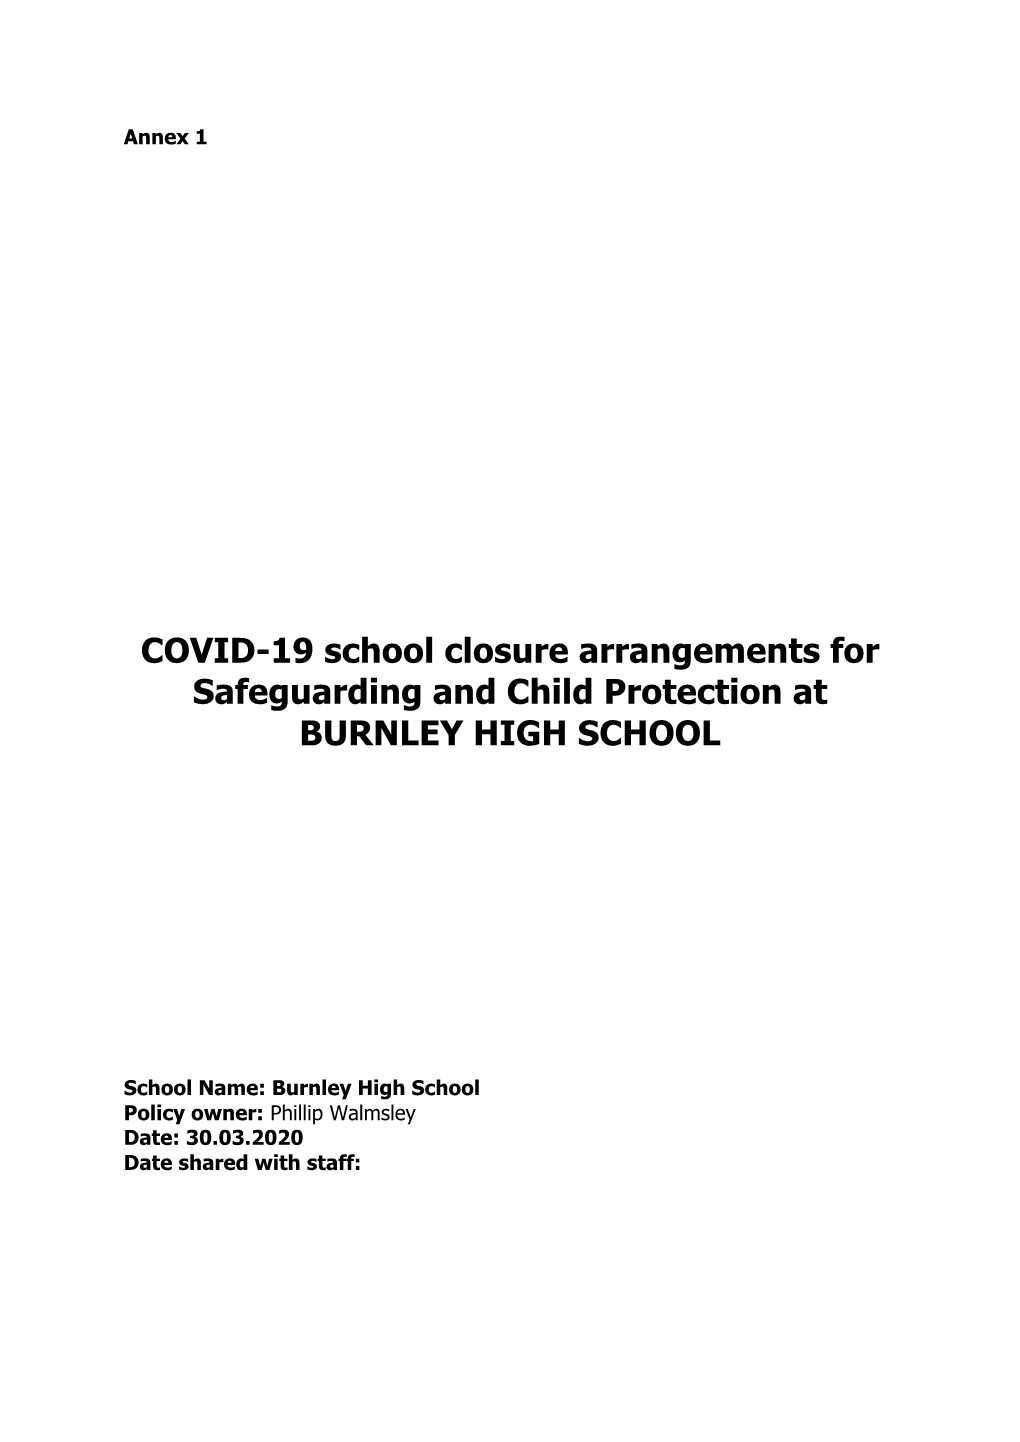 COVID-19 School Closure Arrangements for Safeguarding and Child Protection at BURNLEY HIGH SCHOOL